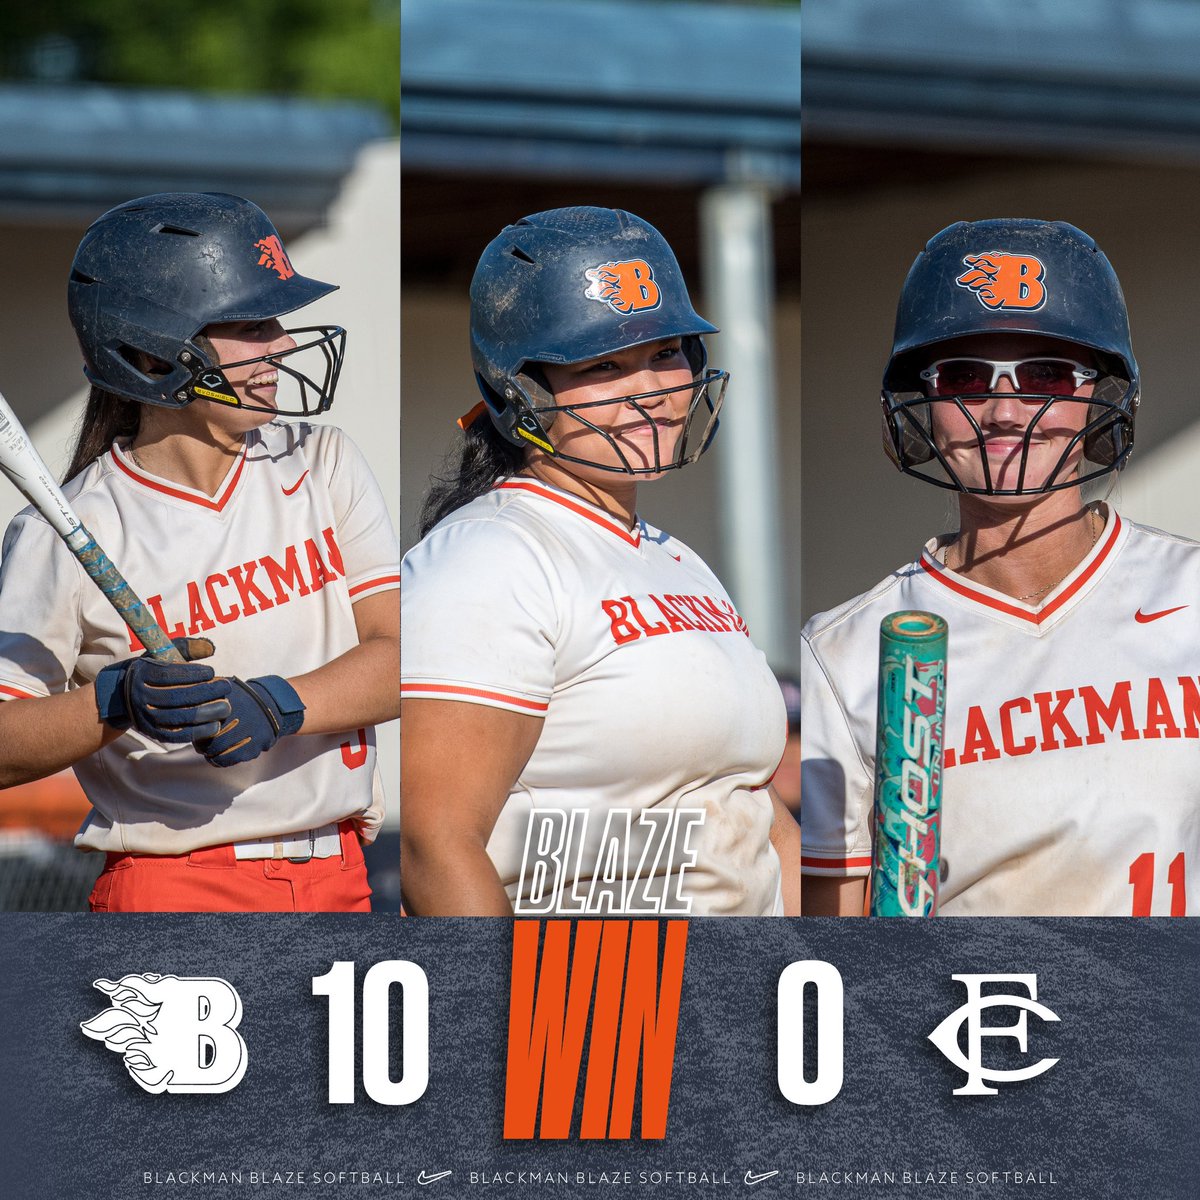 Regular season came to a close with Senior night and we sent them off with a run rule win! Going to miss these seniors, they thought me so much. 
Now we get into the District Tournament, let’s go shock the world! 
#weareBlackman #team24 @LadyBSoftball @KatieRob0618 @myakwazu